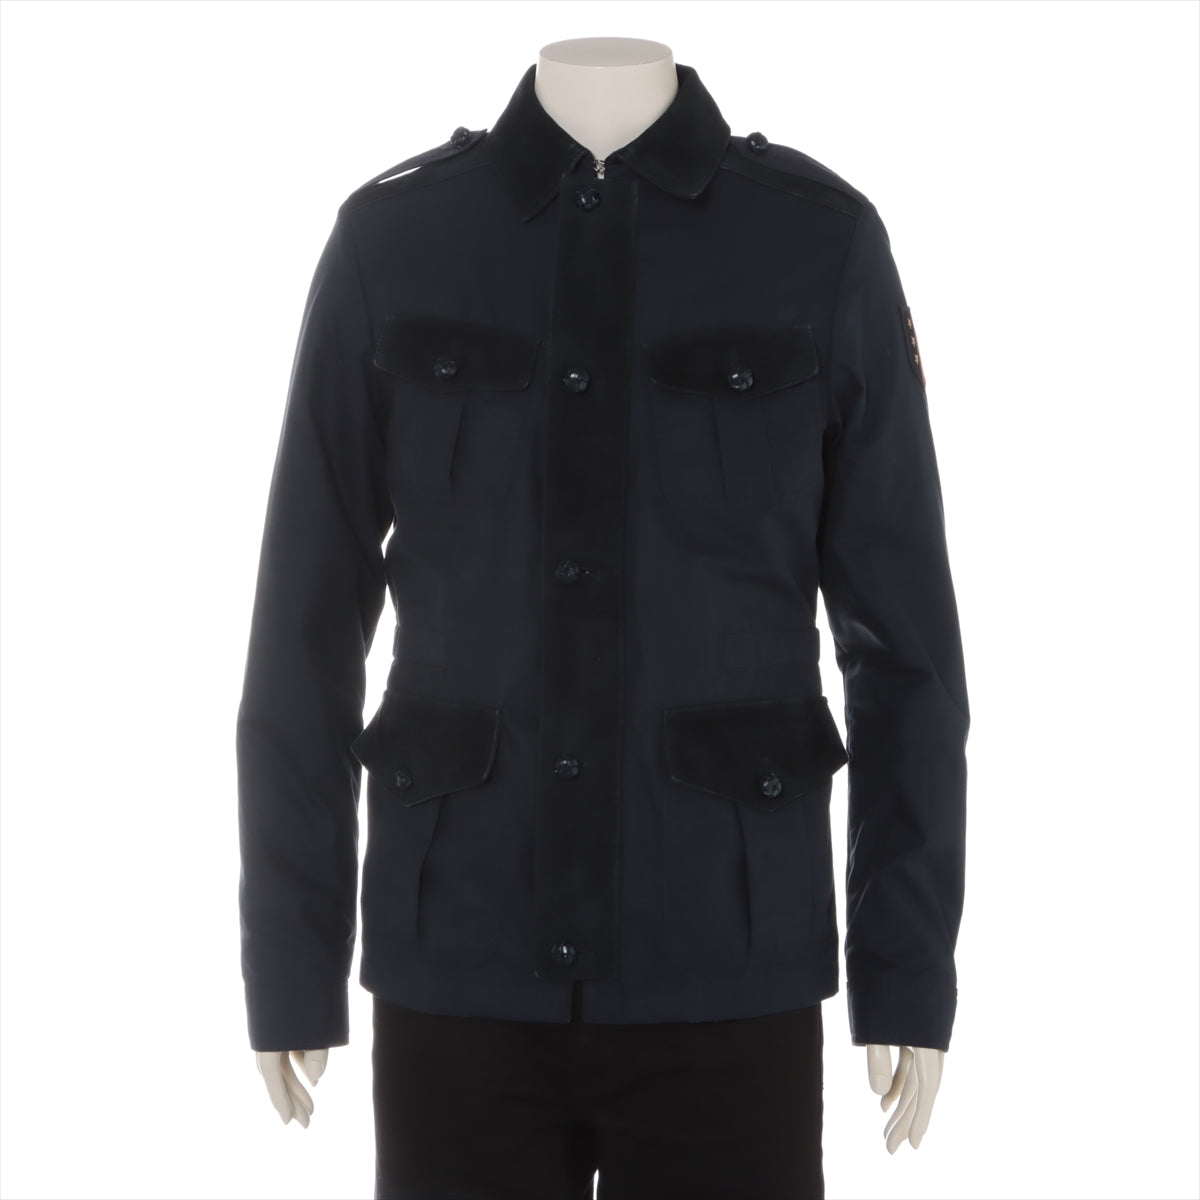 Gucci 15 years Cotton & nylon coats 44 Men's Navy blue Lined  406019